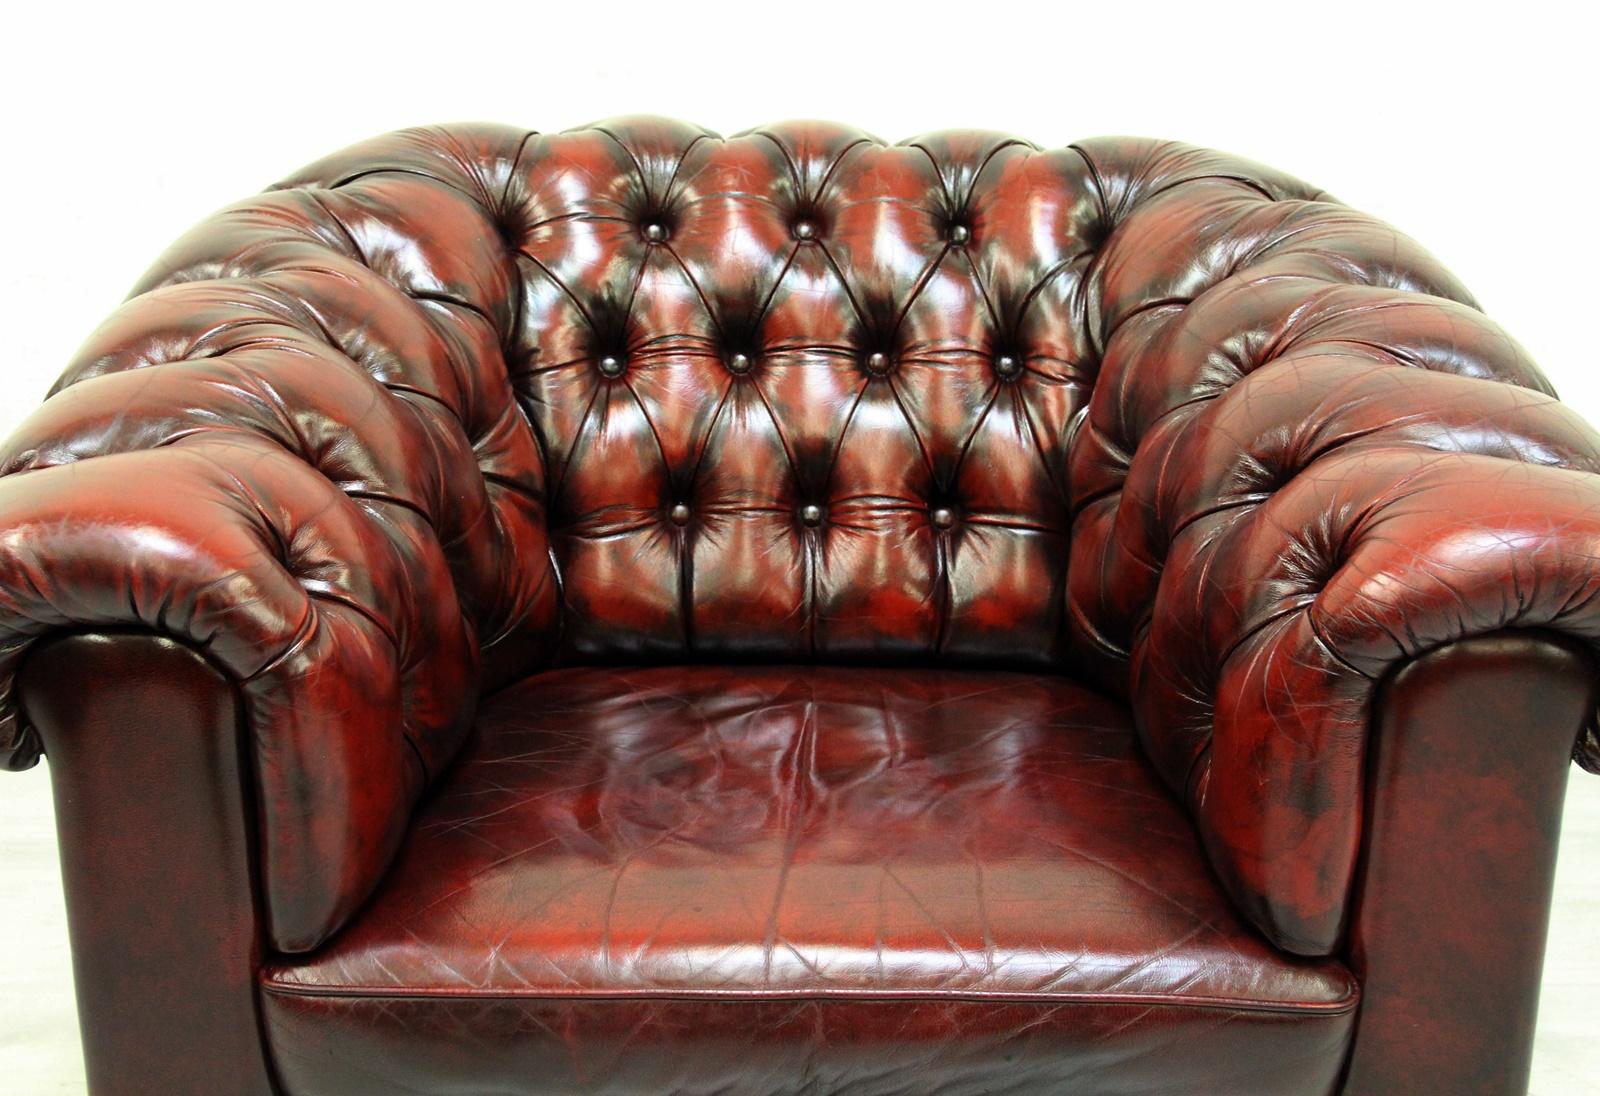 Chesterfield real leather armchair
in original design.

Condition: The armchairs are in a very good condition.
Armchair
Measure: Height x 78cm, length x 100cm, depth x 90cm.
Upholstery is in a very good condition with beautiful patina (see